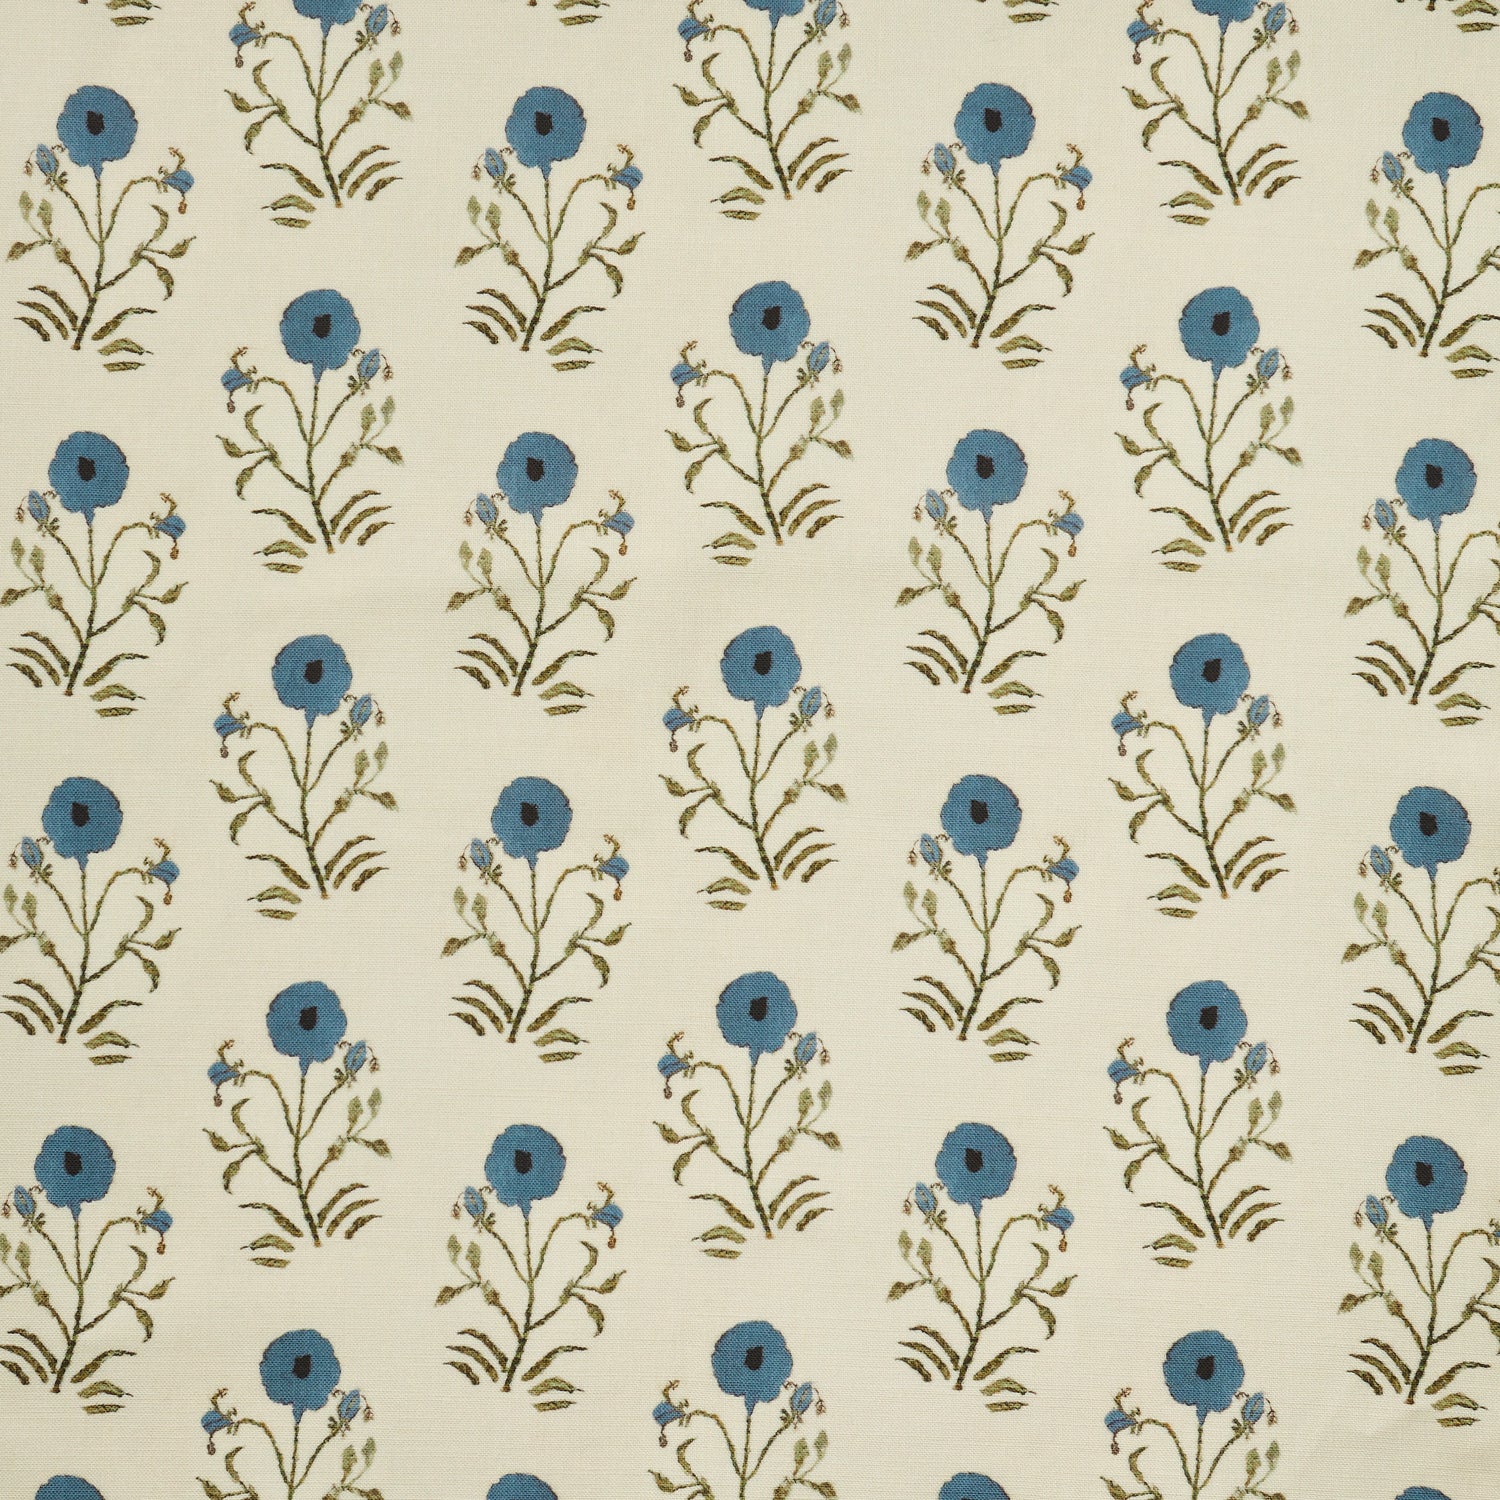 Woven fabric swatch in a painterly floral print in blue and green on a cream field.